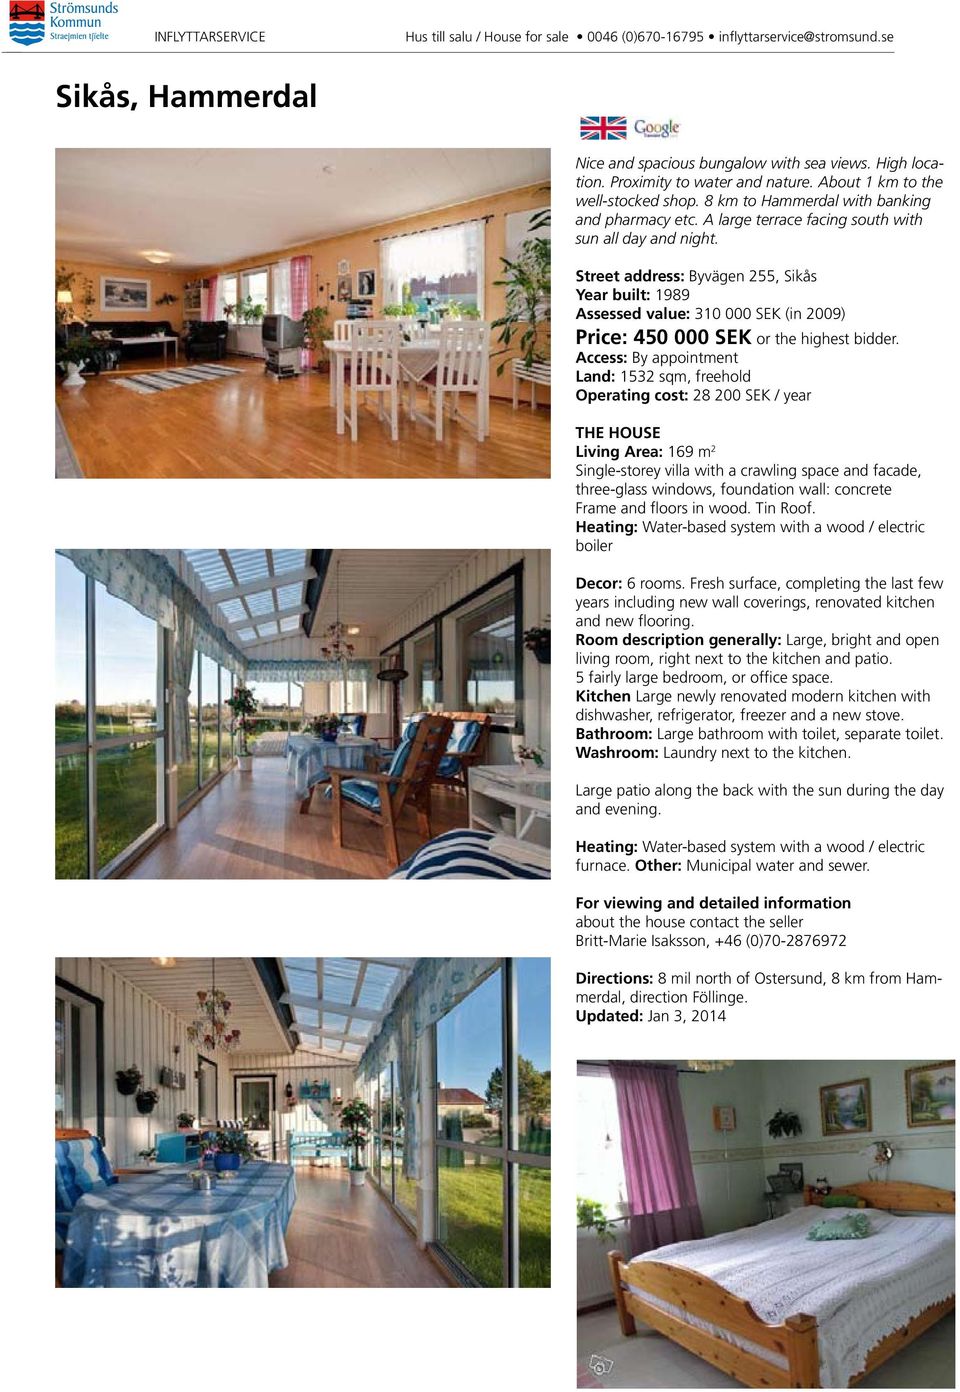 Access: By appointment Land: 152 sqm, freehold Operating cost: 28 200 SEK / year the house Living Area: 169 m 2 Single-storey villa with a crawling space and facade, three-glass windows, foundation